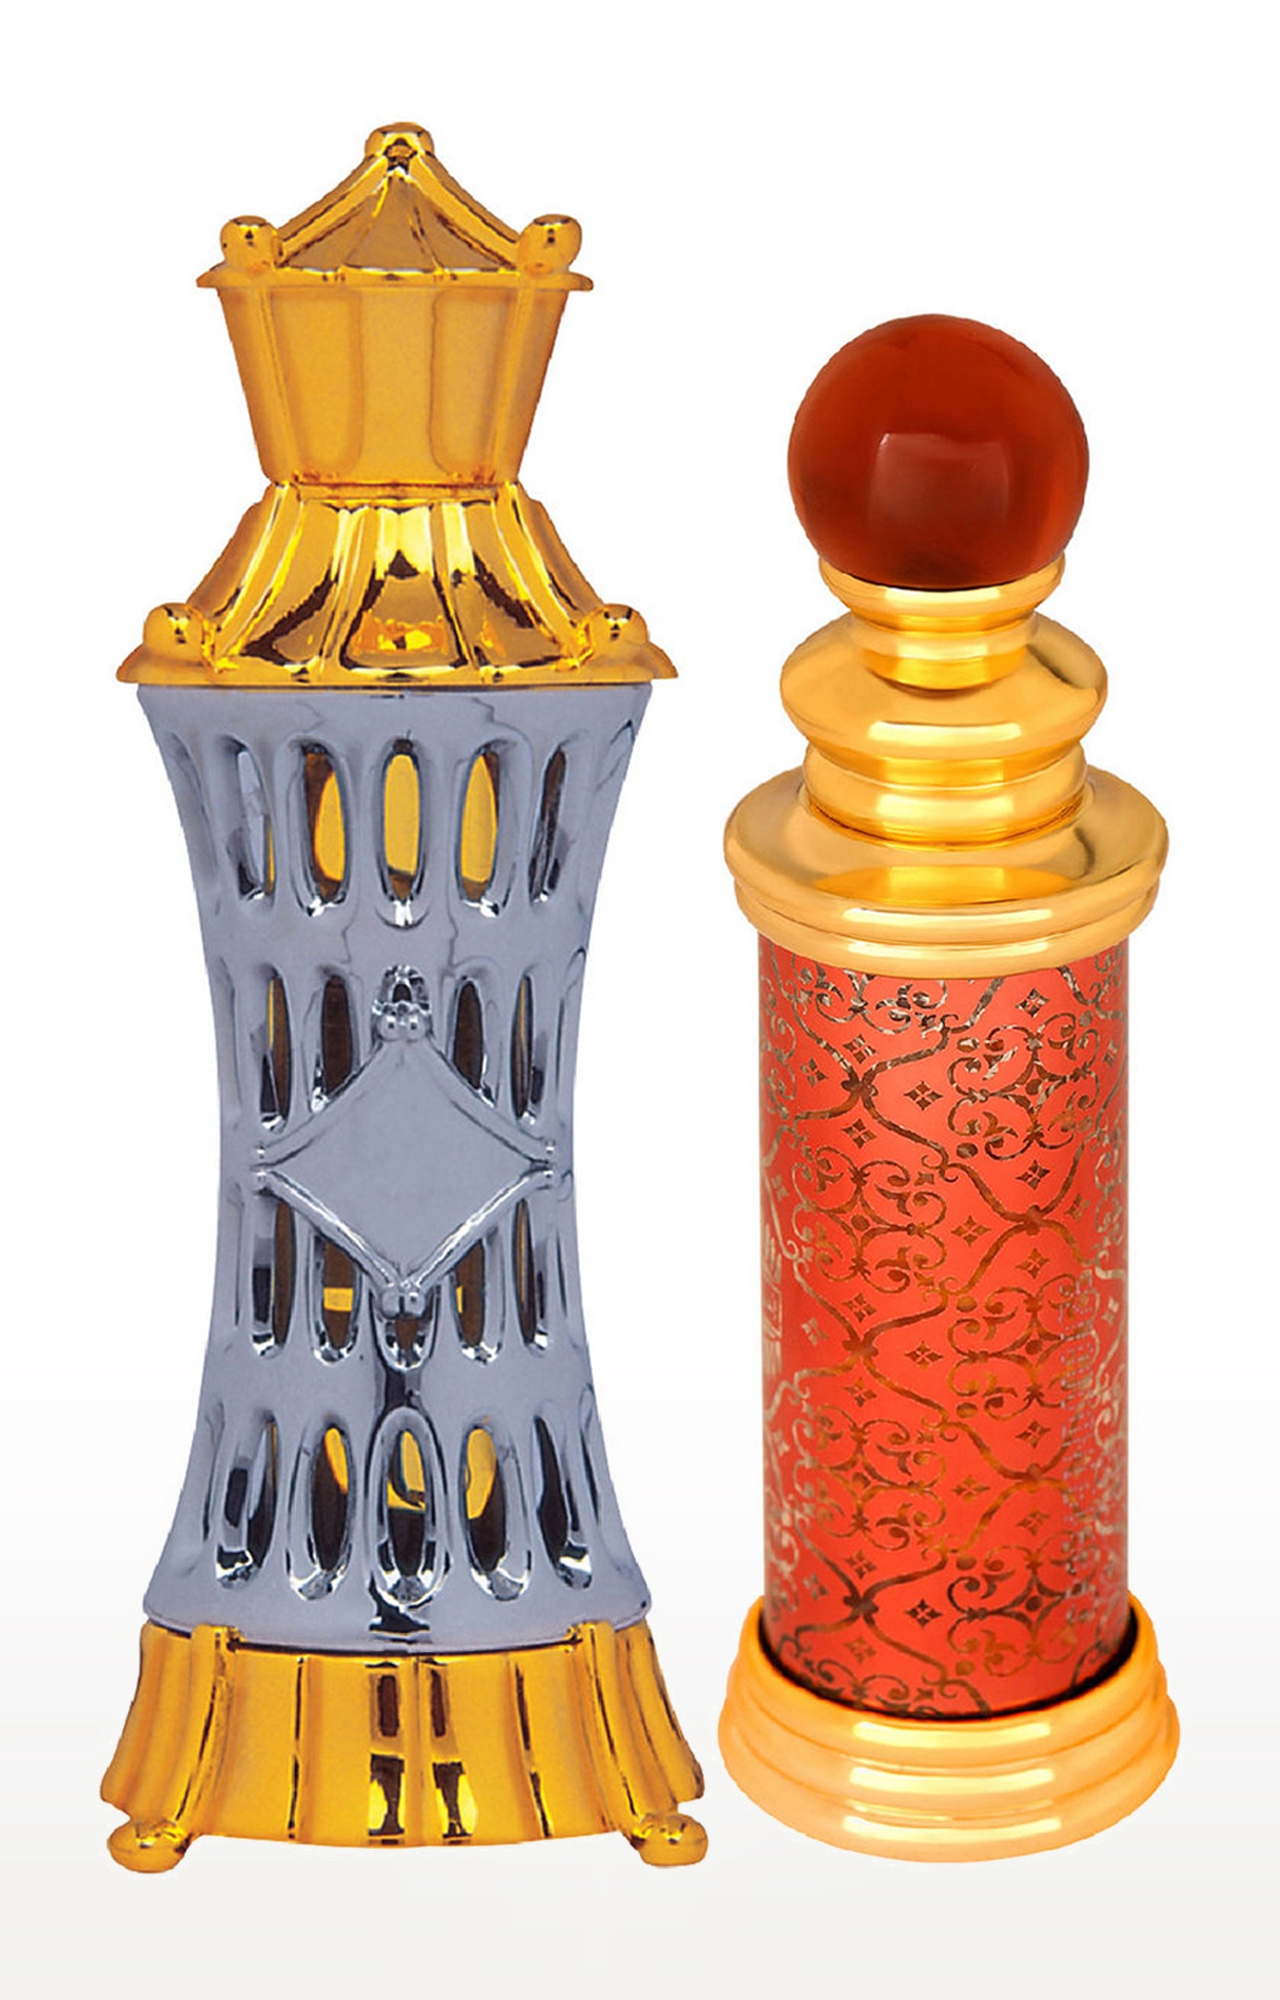 Ajmal Mizyaan Concentrated Perfume Oil Oriental Musky Alcohol-free Attar 14ml for Unisex and Classic Oud Concentrated Perfume Oil Oudh Alcohol-free Attar 10ml for Unisex